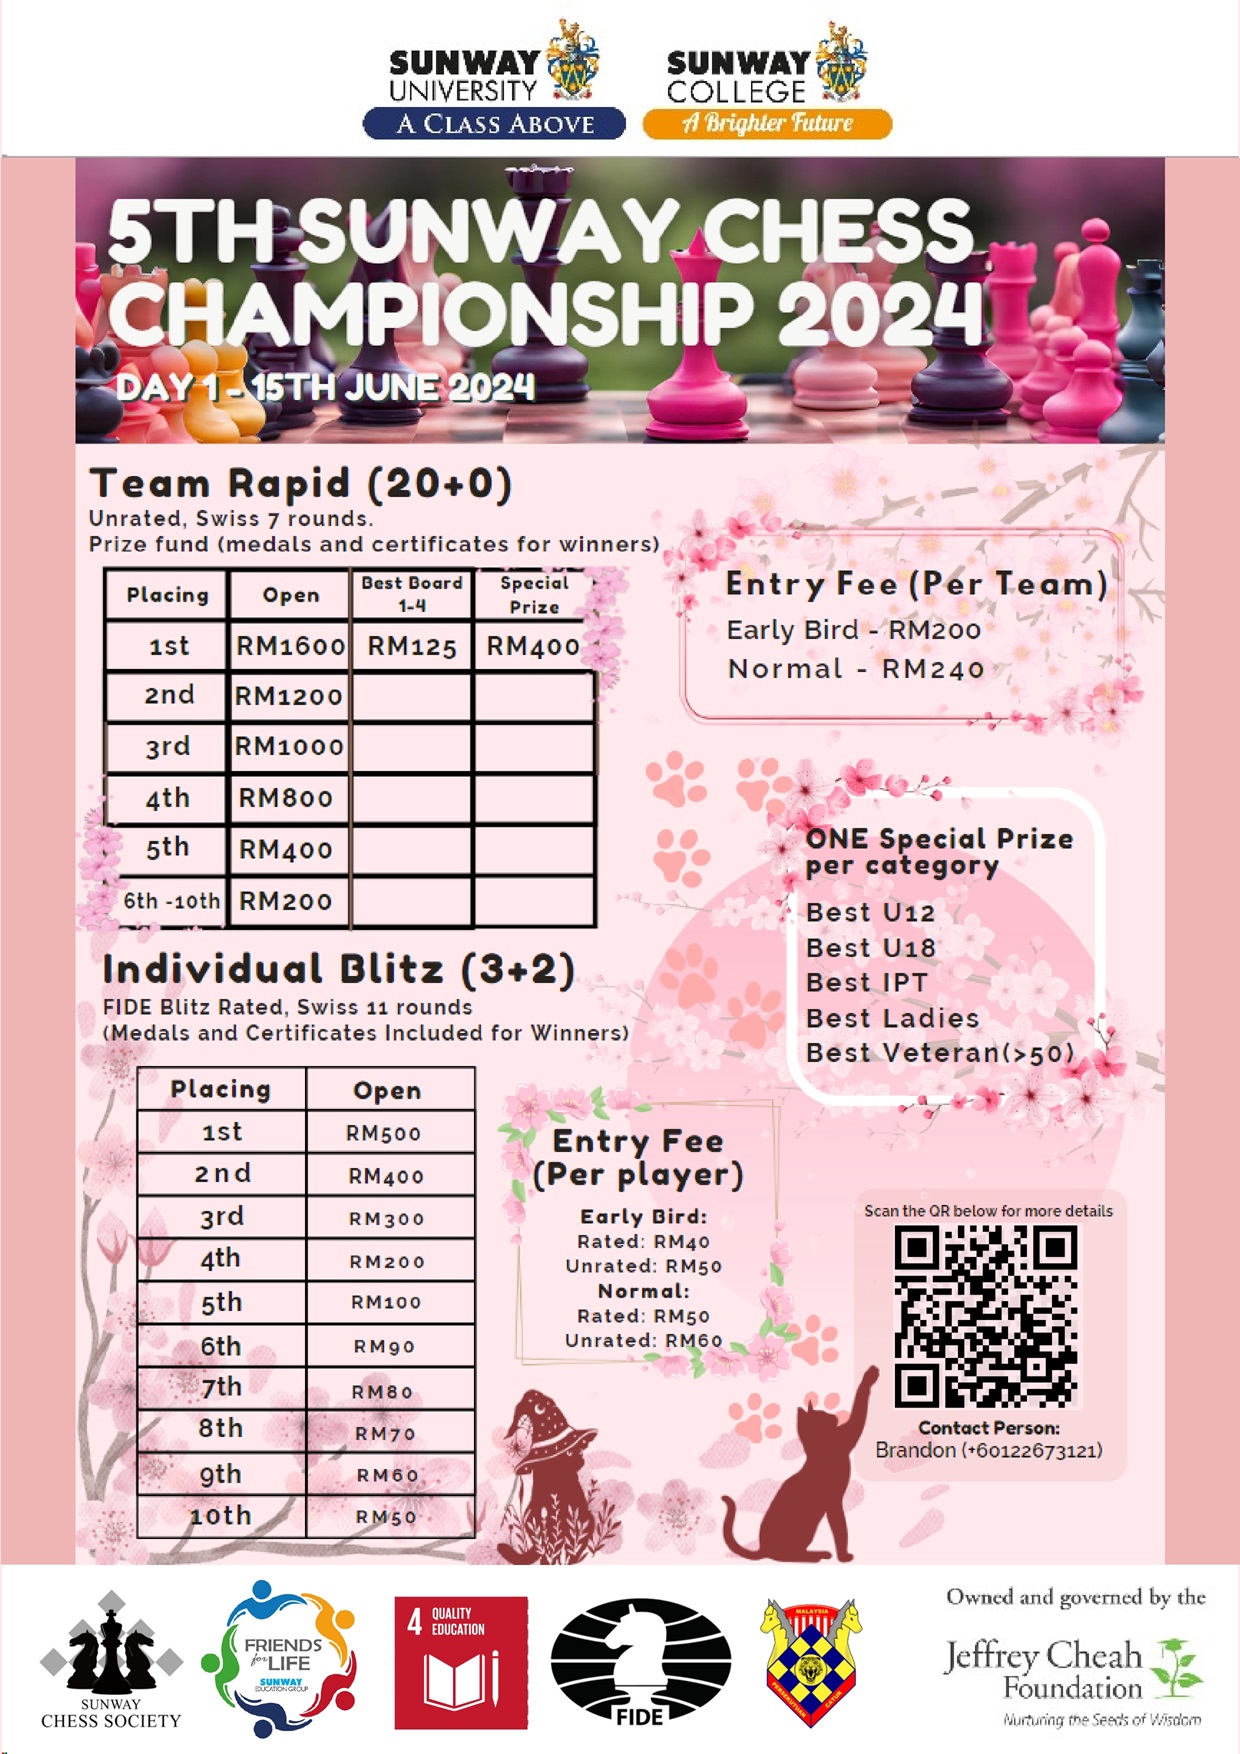 5th Sunway Chess Championship 2024 Blitz (FIDE Rated)